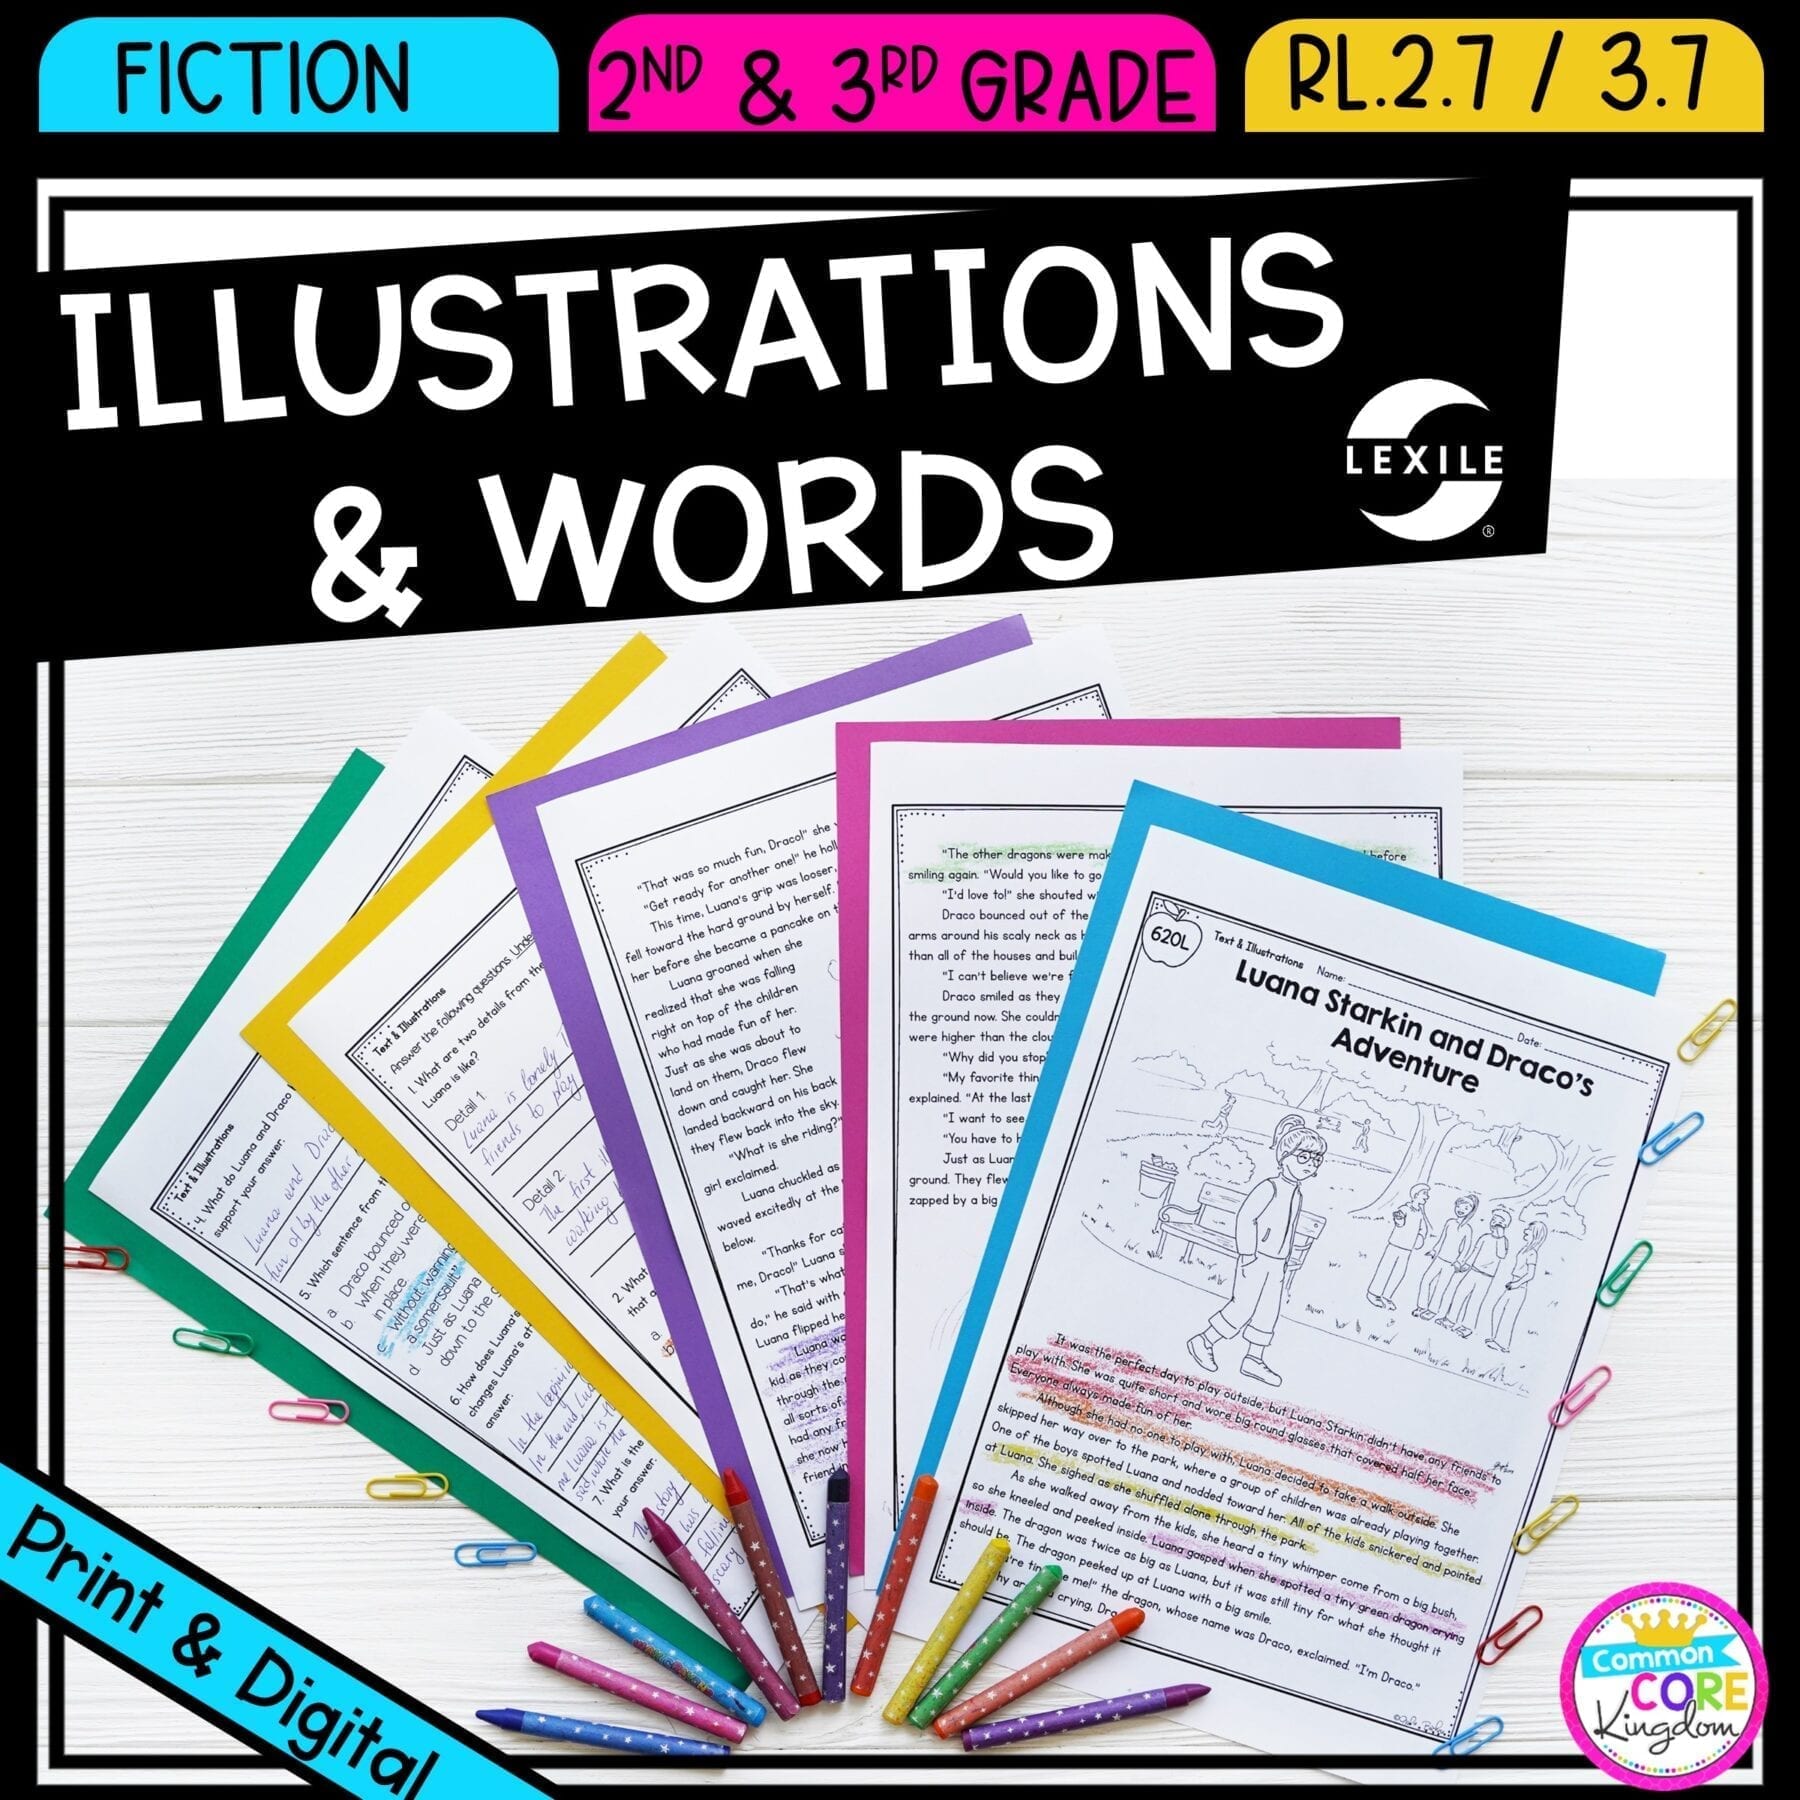 Using Illustrations to Understand Text for 2nd and 3rd grade cover showing printable and digital worksheets